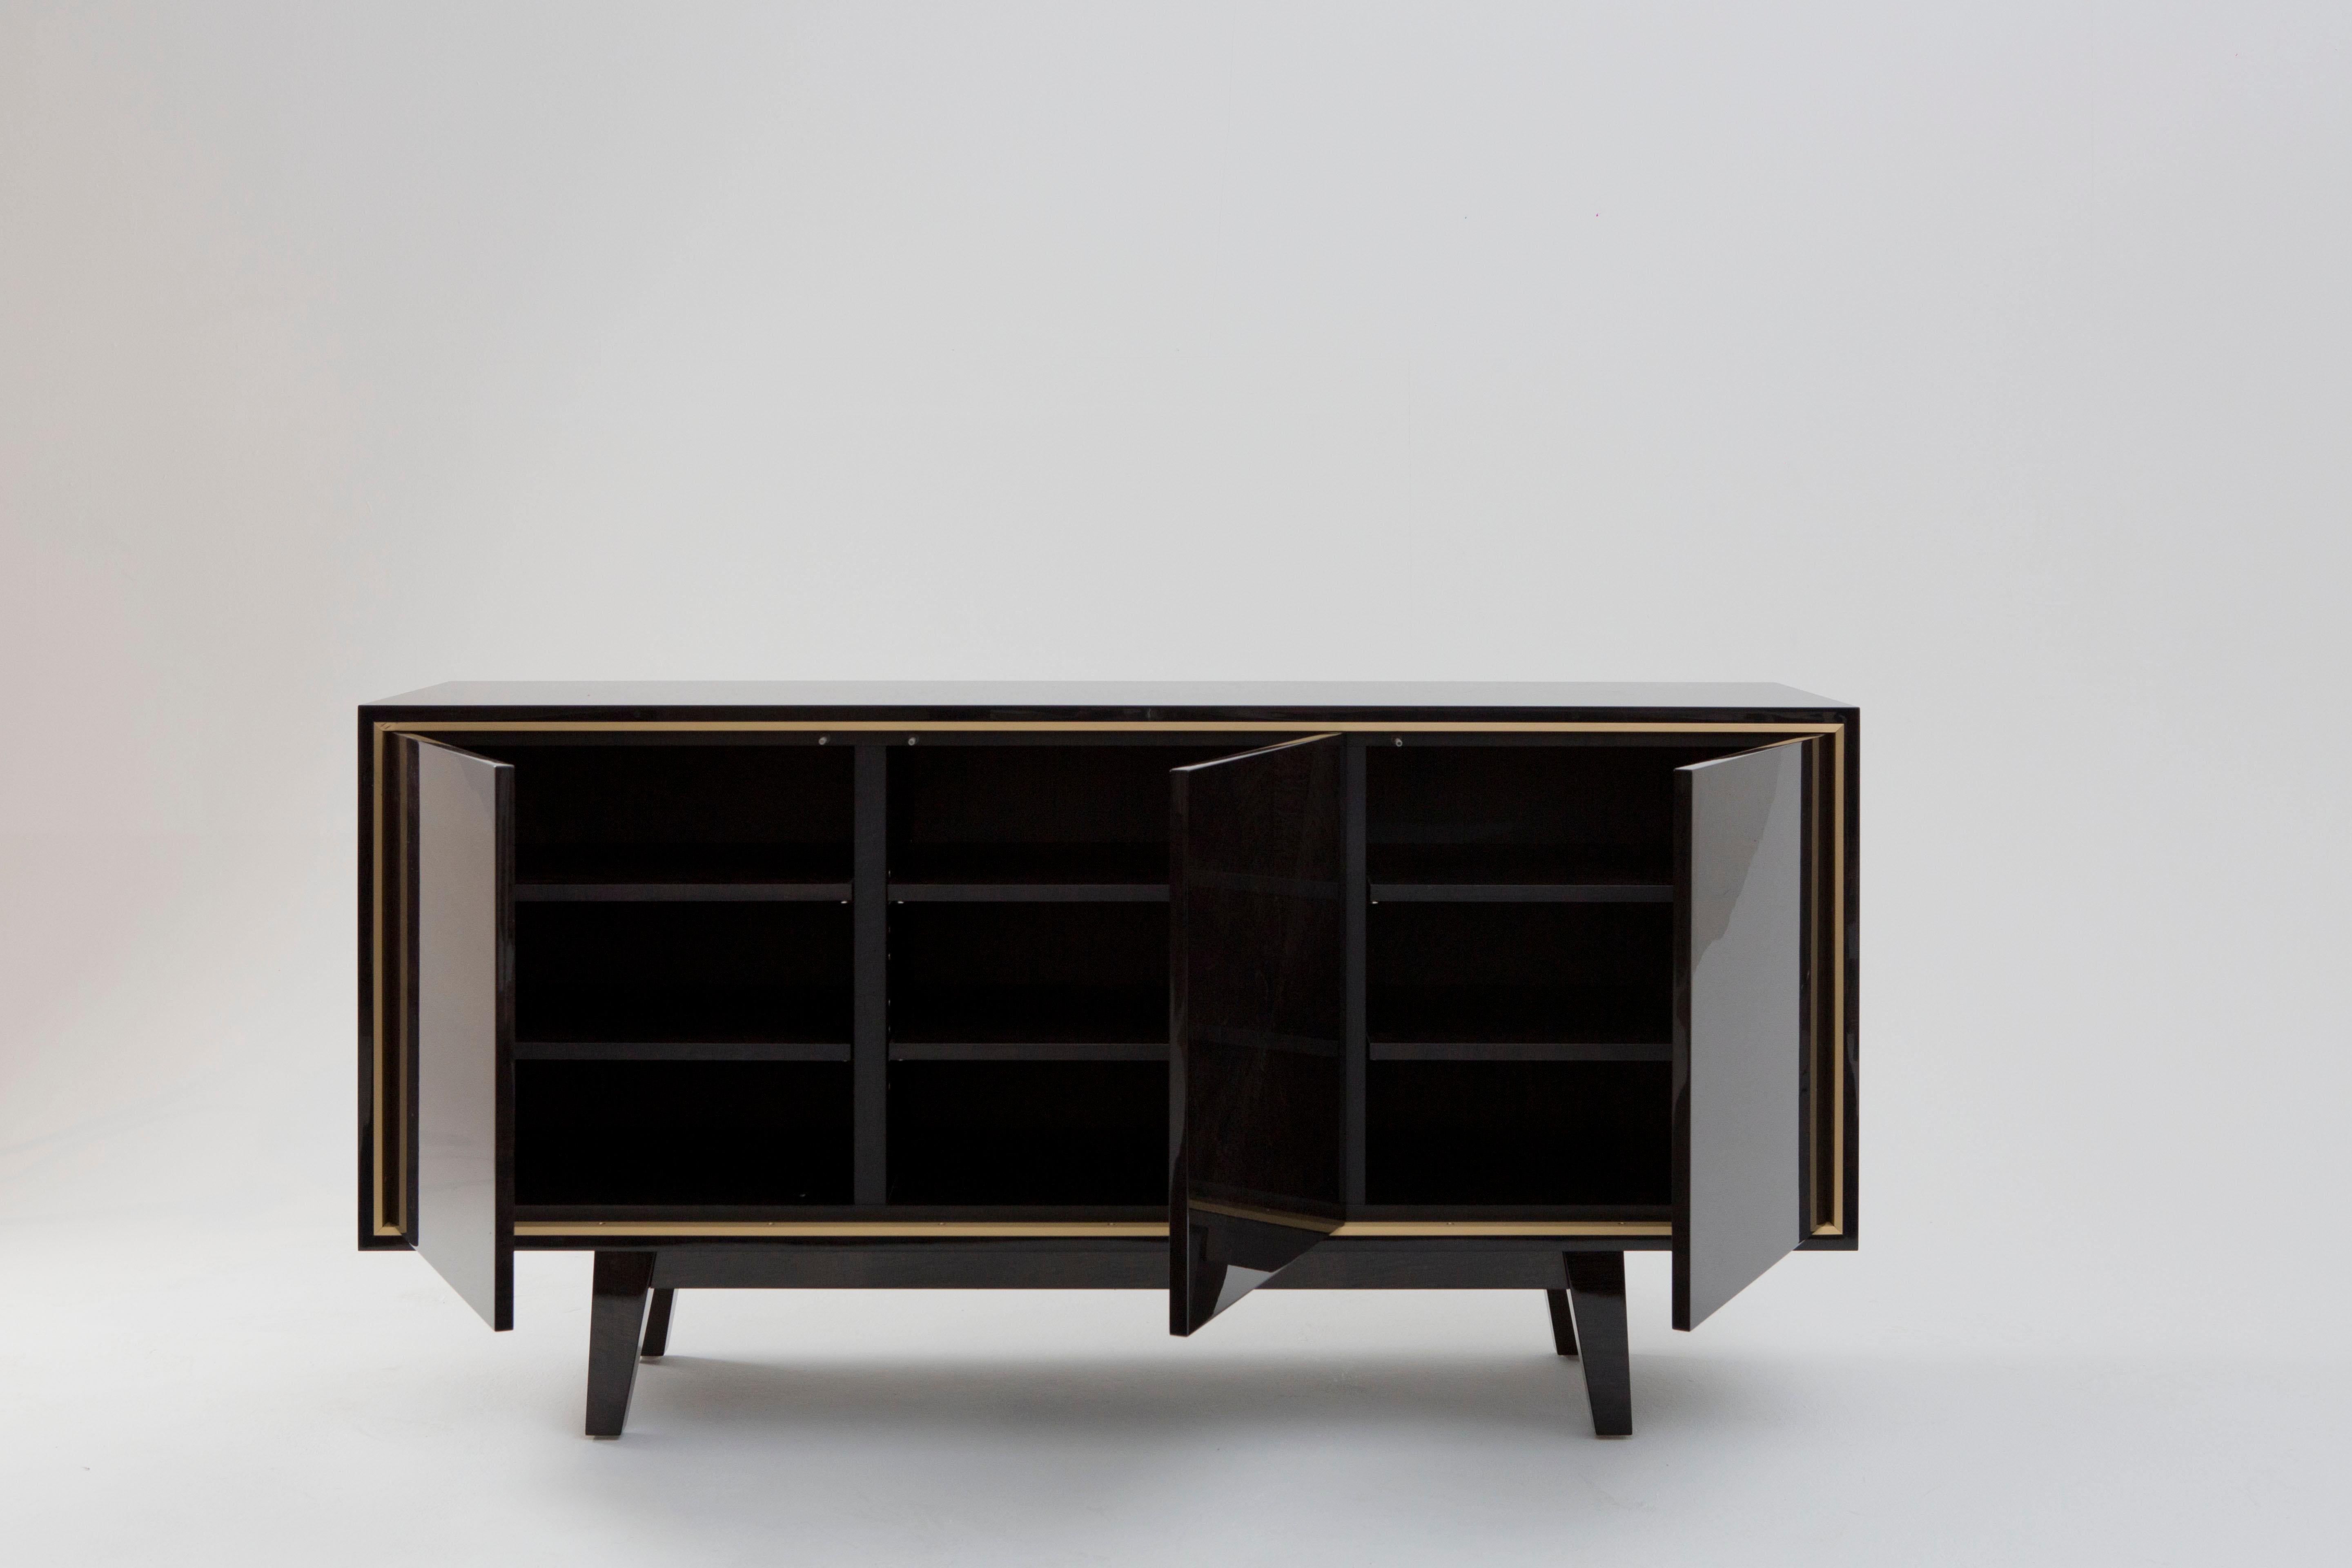 An exquisite side cabinet of sleek proportions that will look superior in any fine dining room or hallway.
The cabinet is finished in a beautiful dark and lustrous hand tinted sycamore with brushed brass trim. The interior of the cabinet also